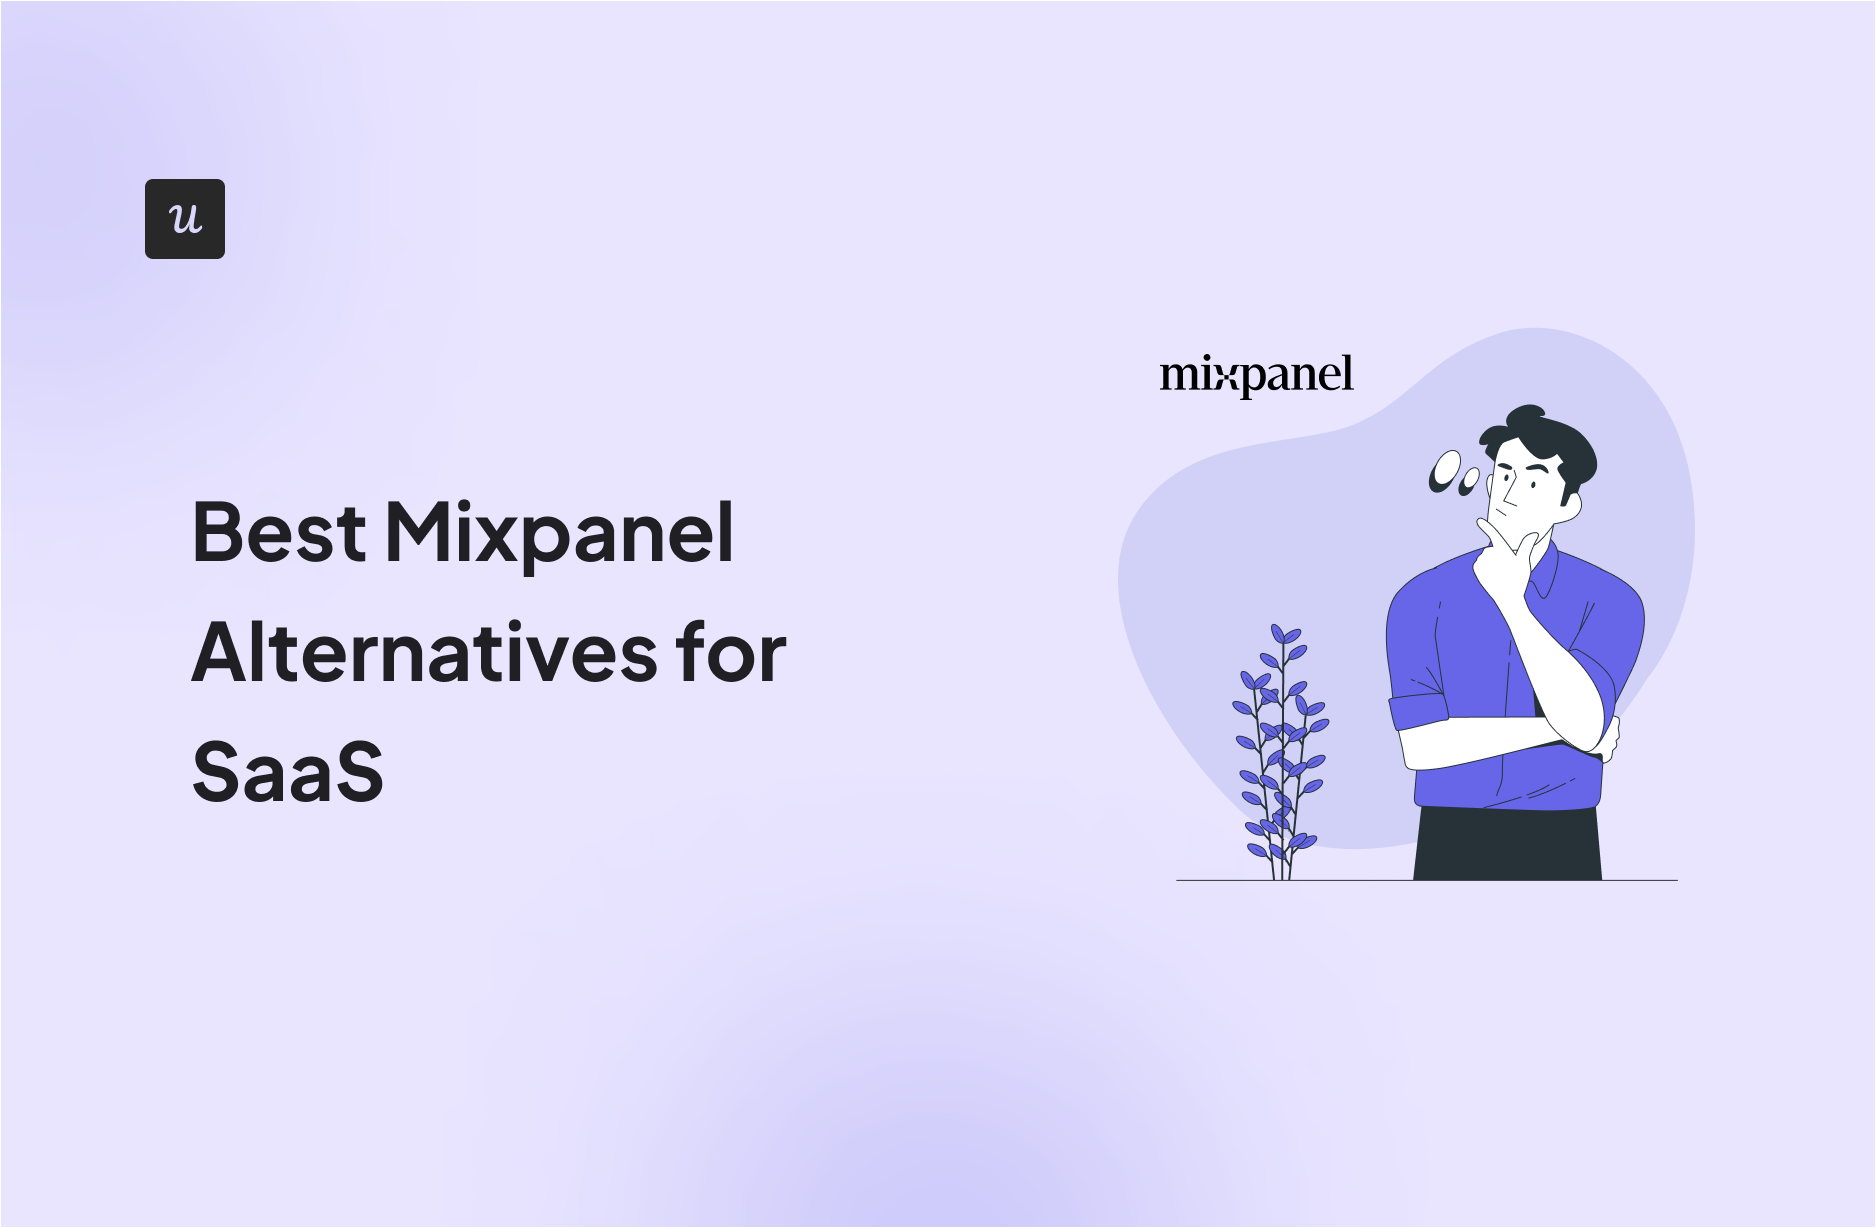 Best Mixpanel Alternatives for SaaS